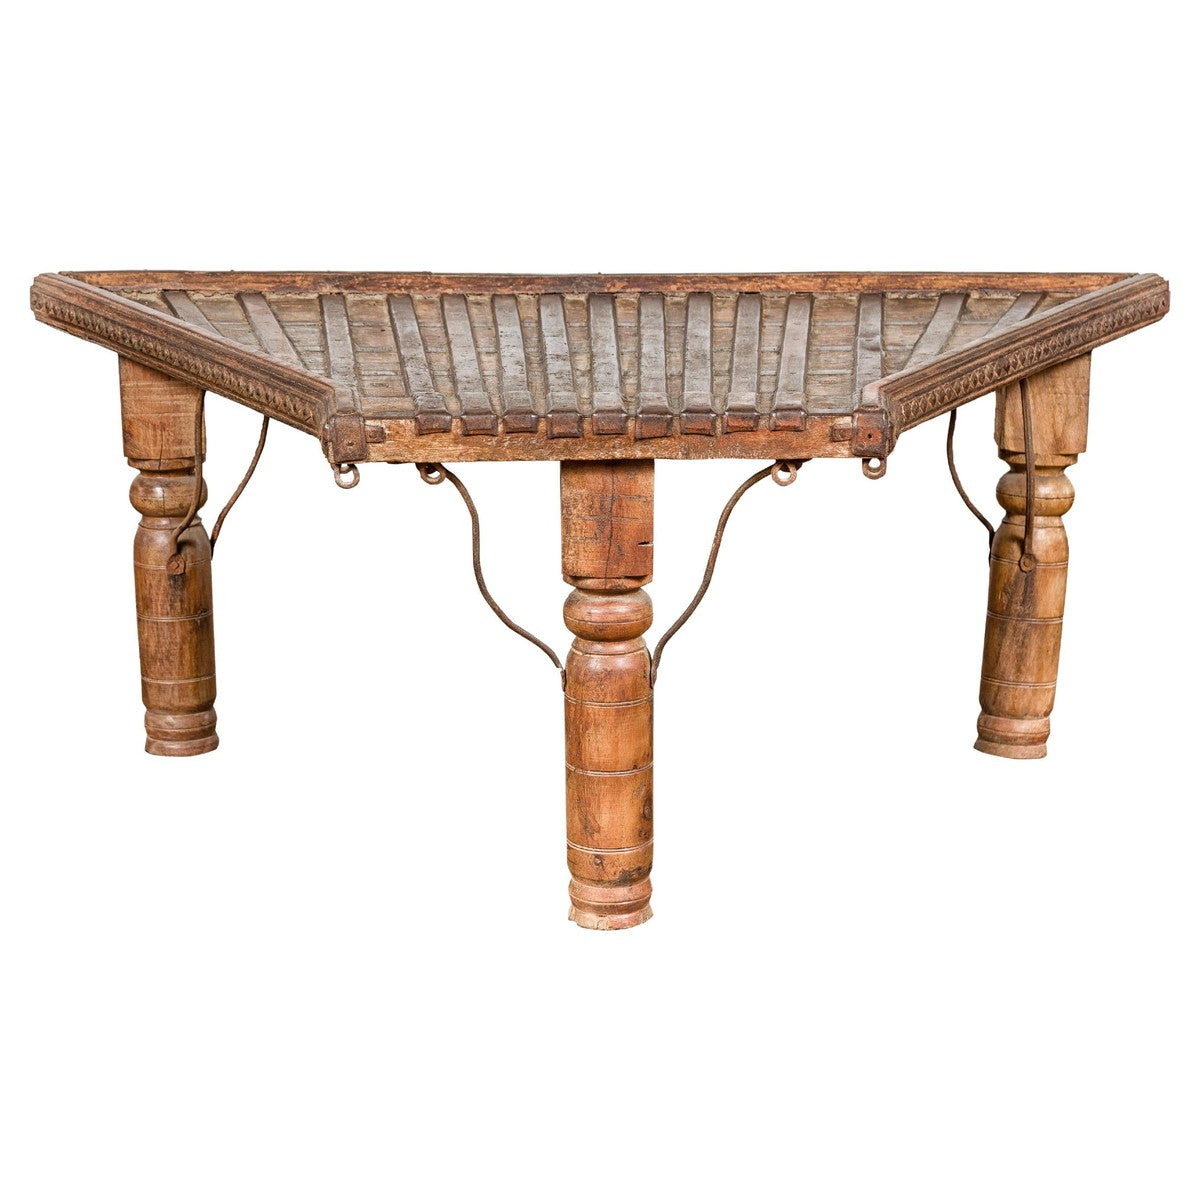 Bullock Cart Rustic Coffee Table with Twisted Iron Stretchers, 19th Century-YN7710-1. Asian & Chinese Furniture, Art, Antiques, Vintage Home Décor for sale at FEA Home